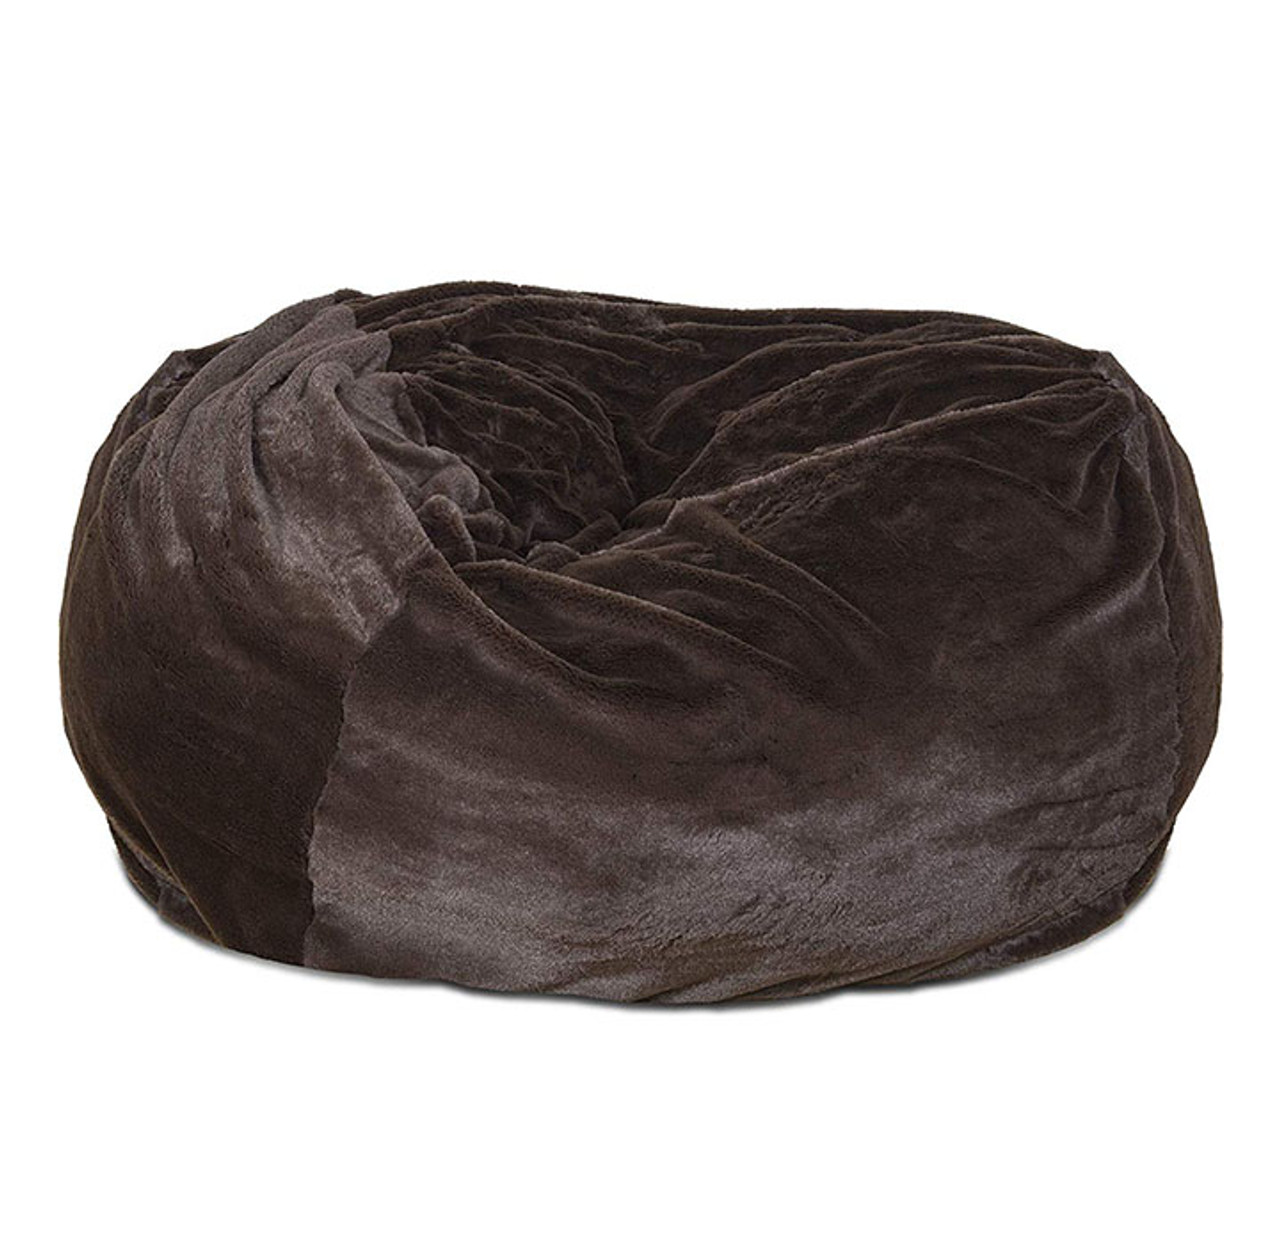 FurHaven™ Insulating Plush Pet Ball Lounger Bed product image